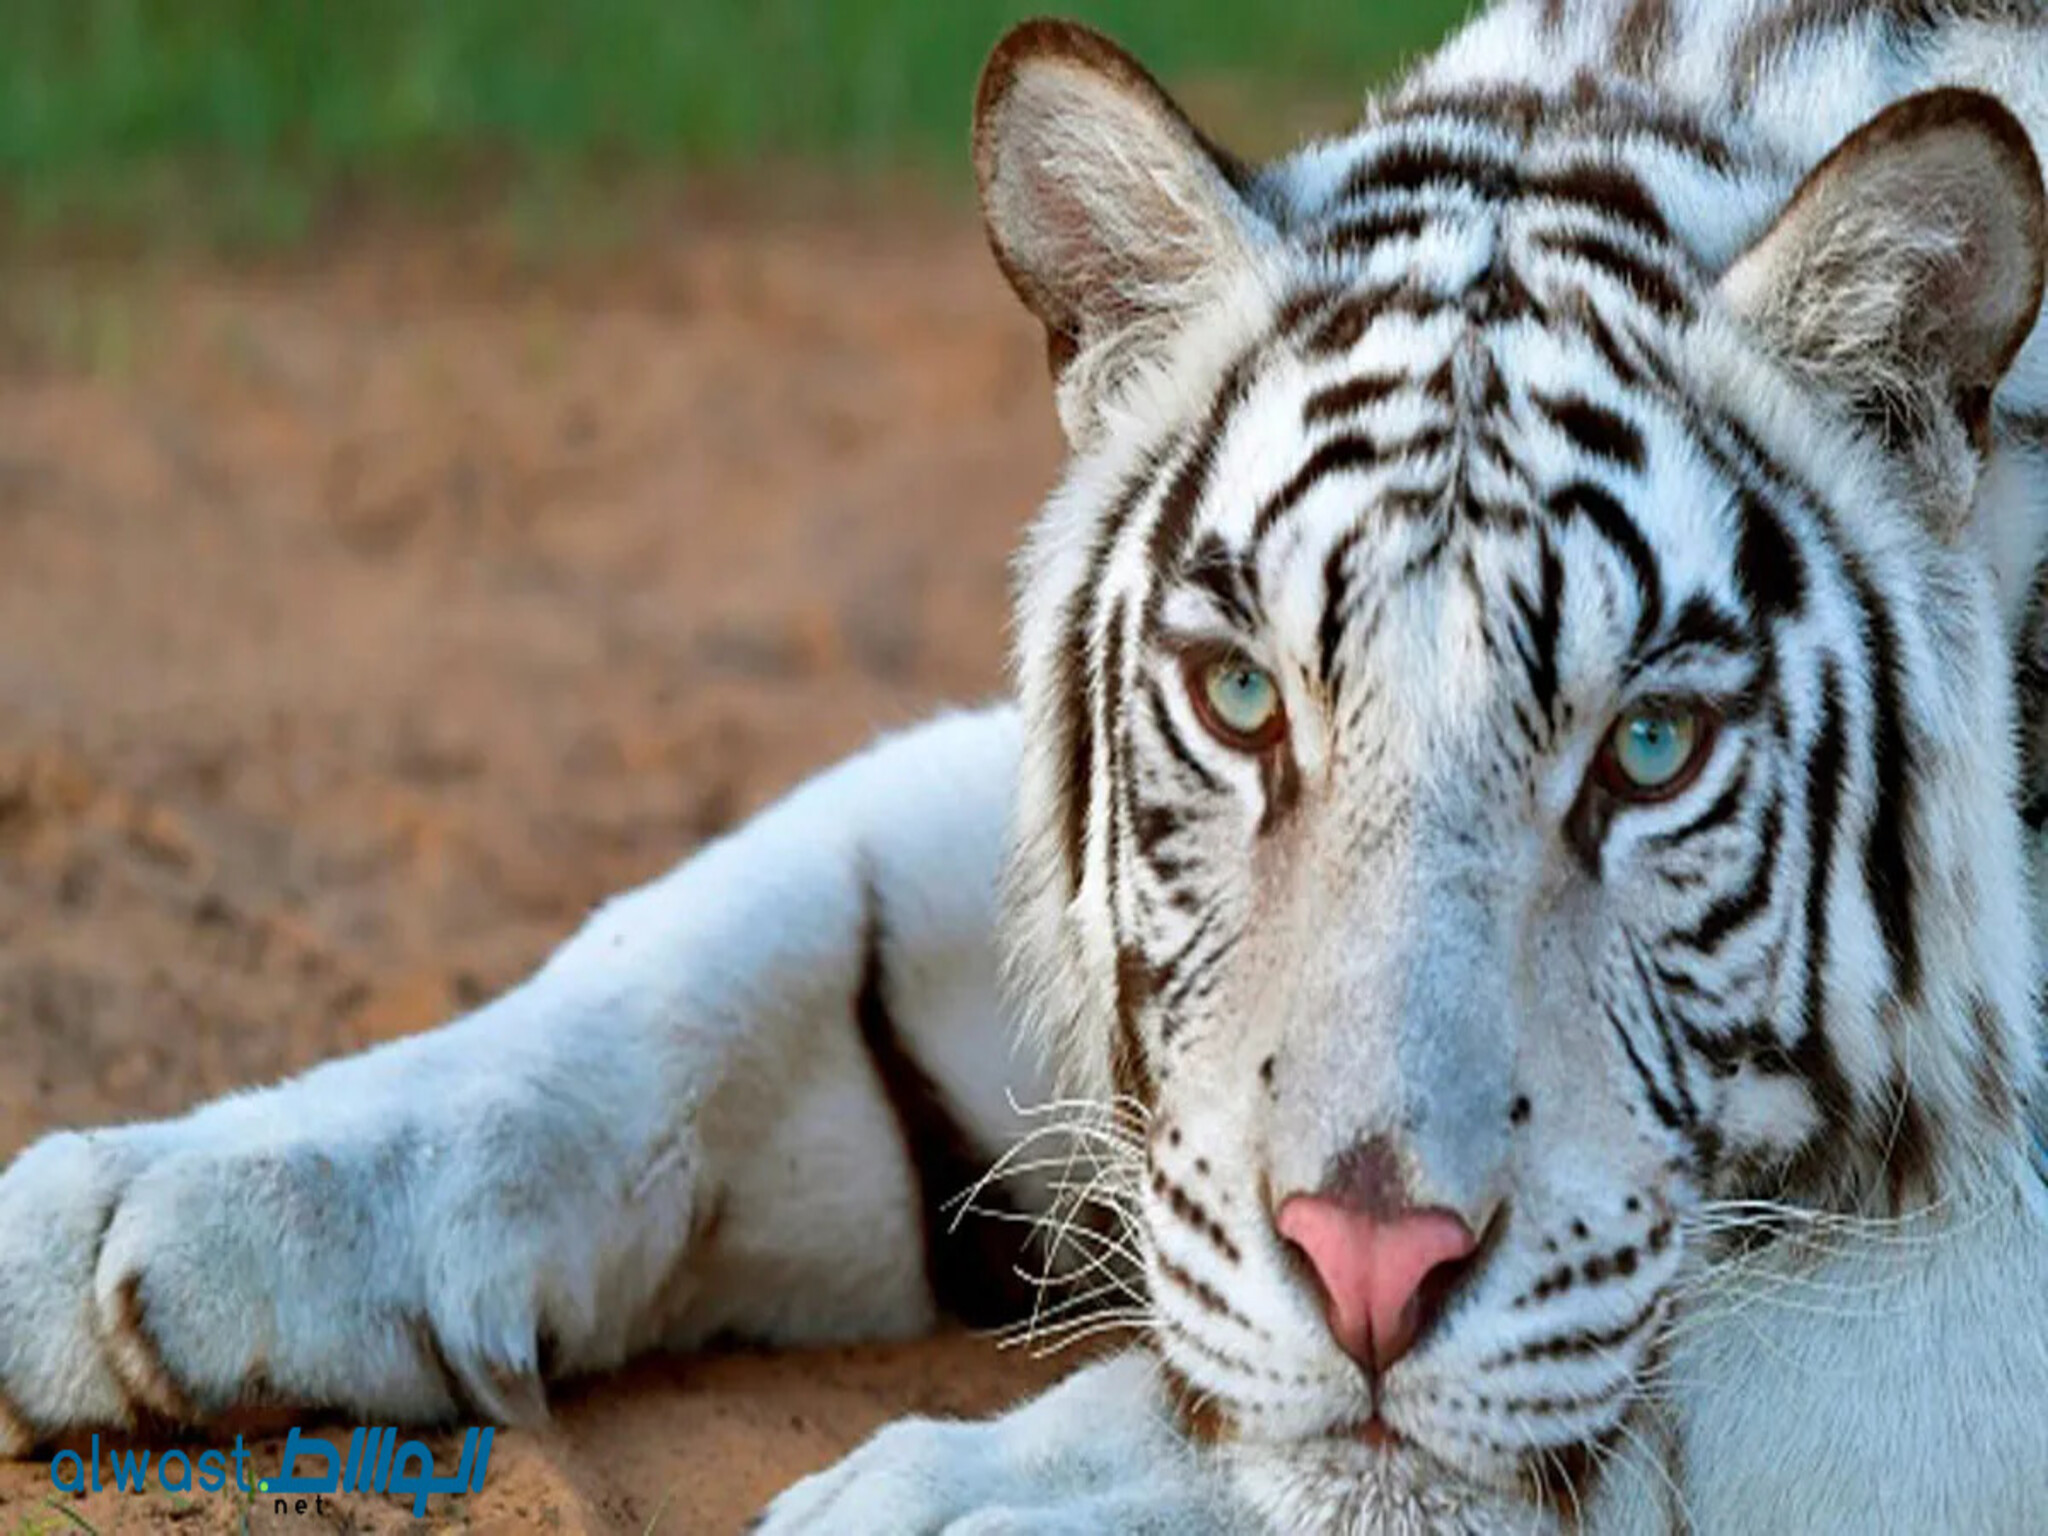 Sharjah Environment Authority denies rumors of tiger on the loose